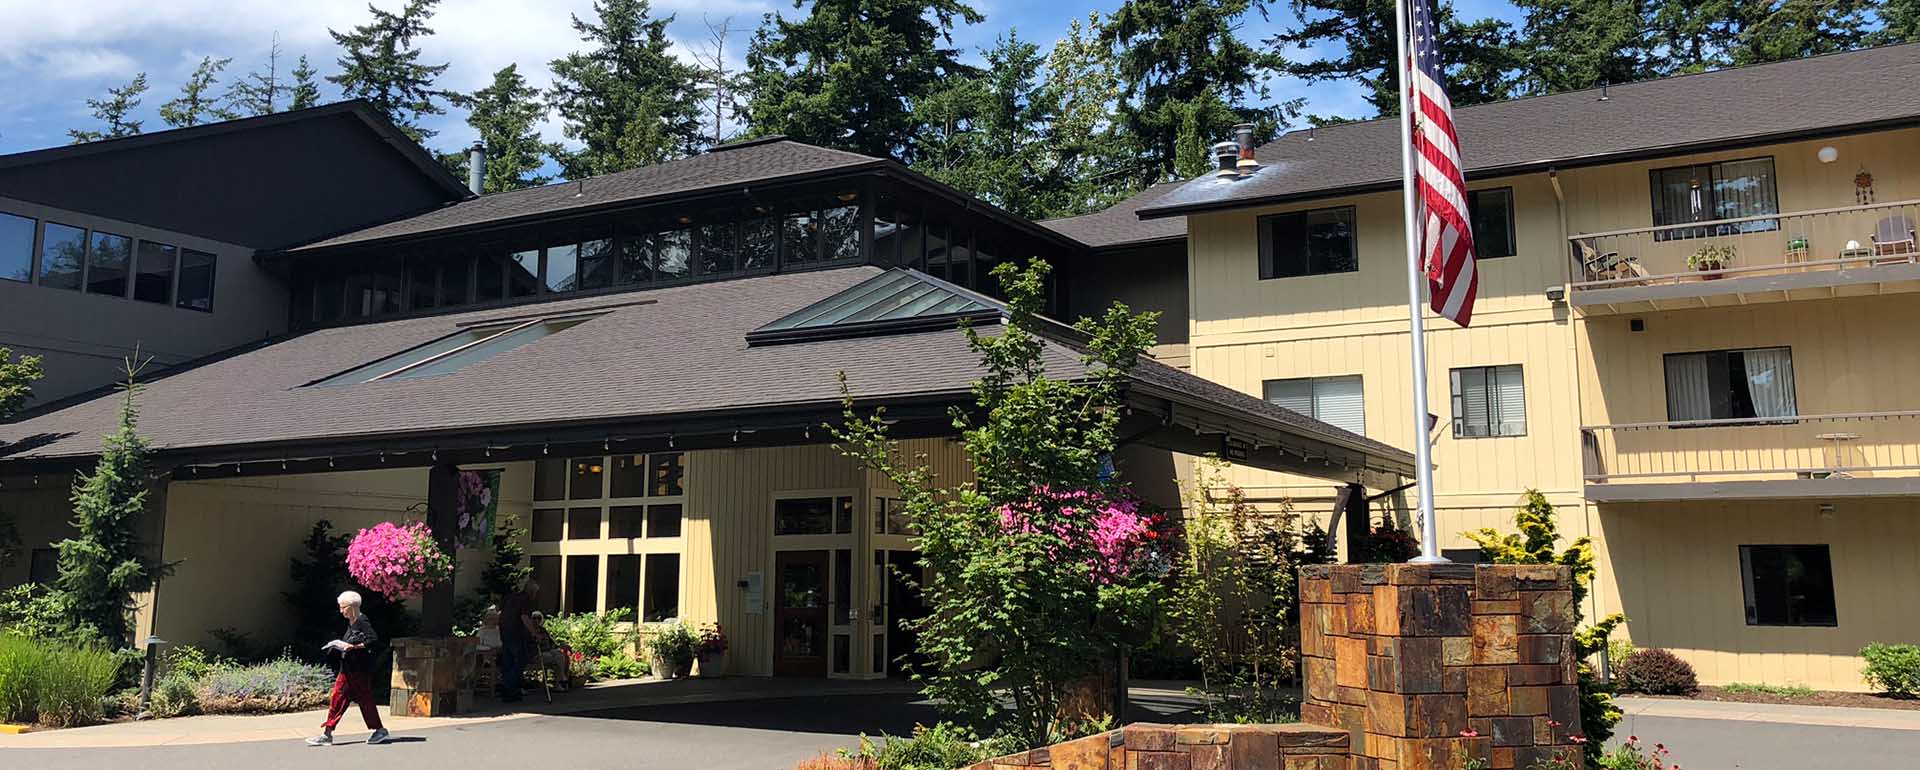 The Willows Bellingham community exterior